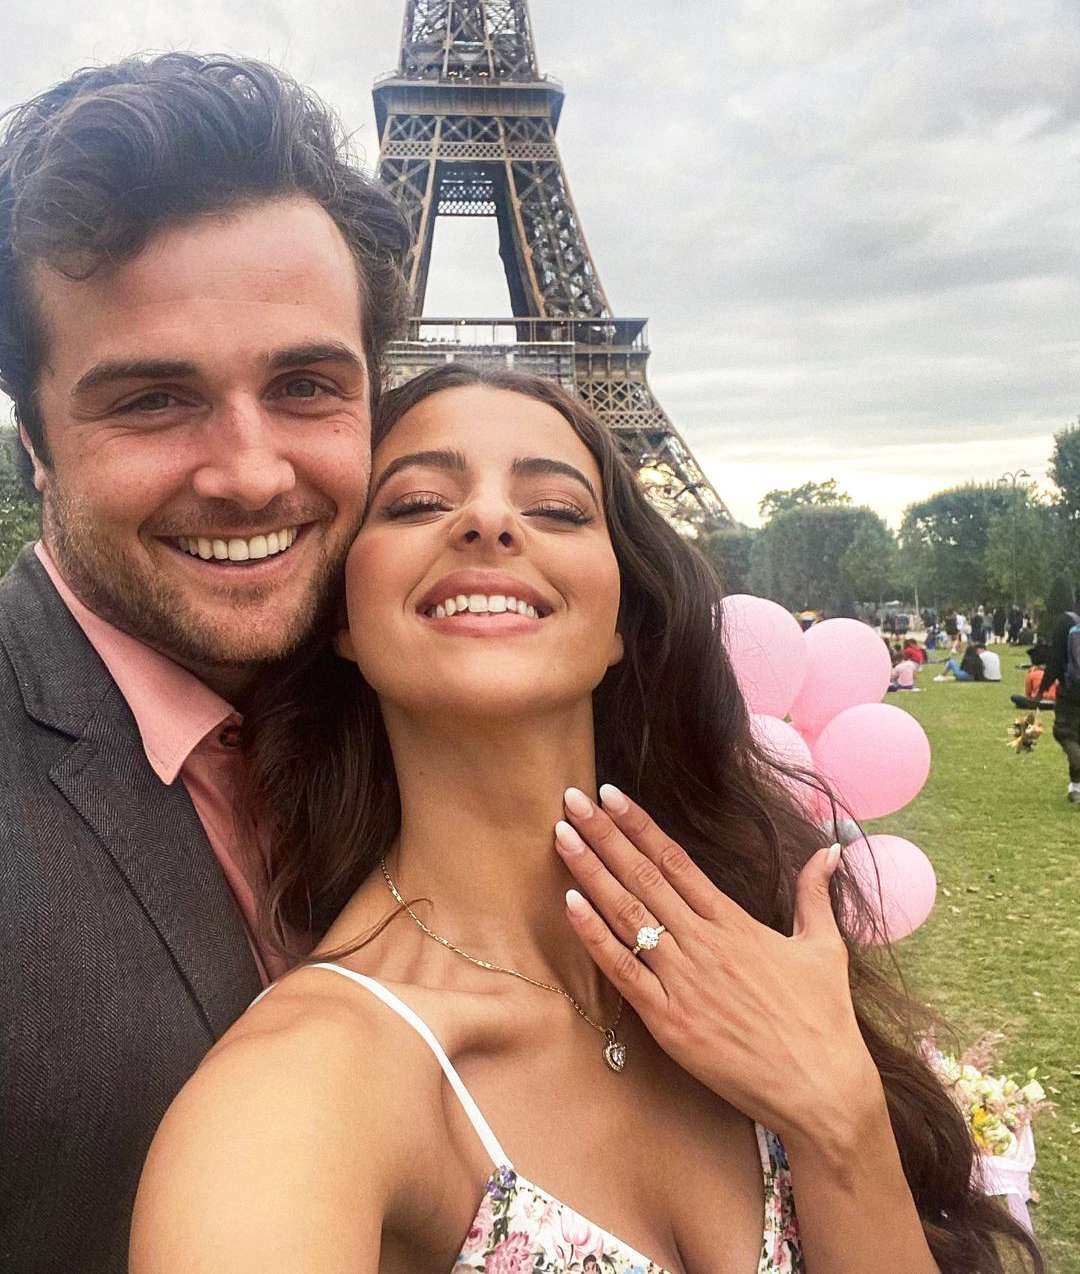 Beau Mirchoff and Jenny Meinen get engaged in Paris.